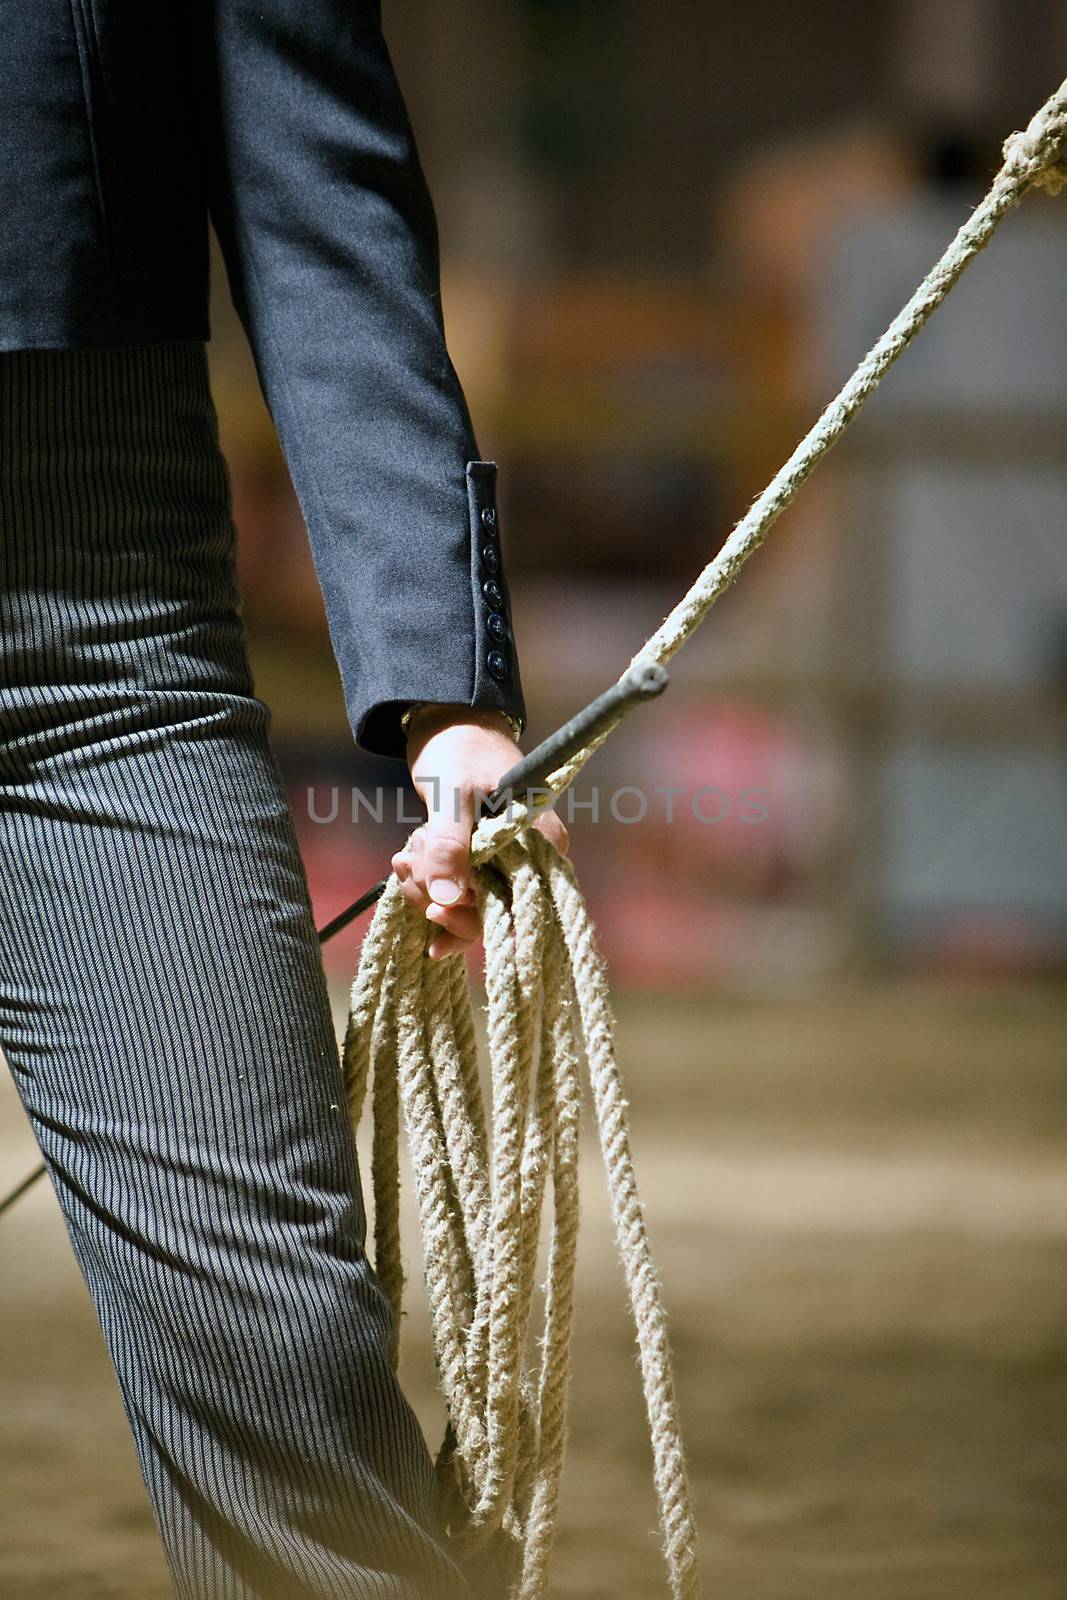 Rider holding rope during an equestrian event by digicomphoto